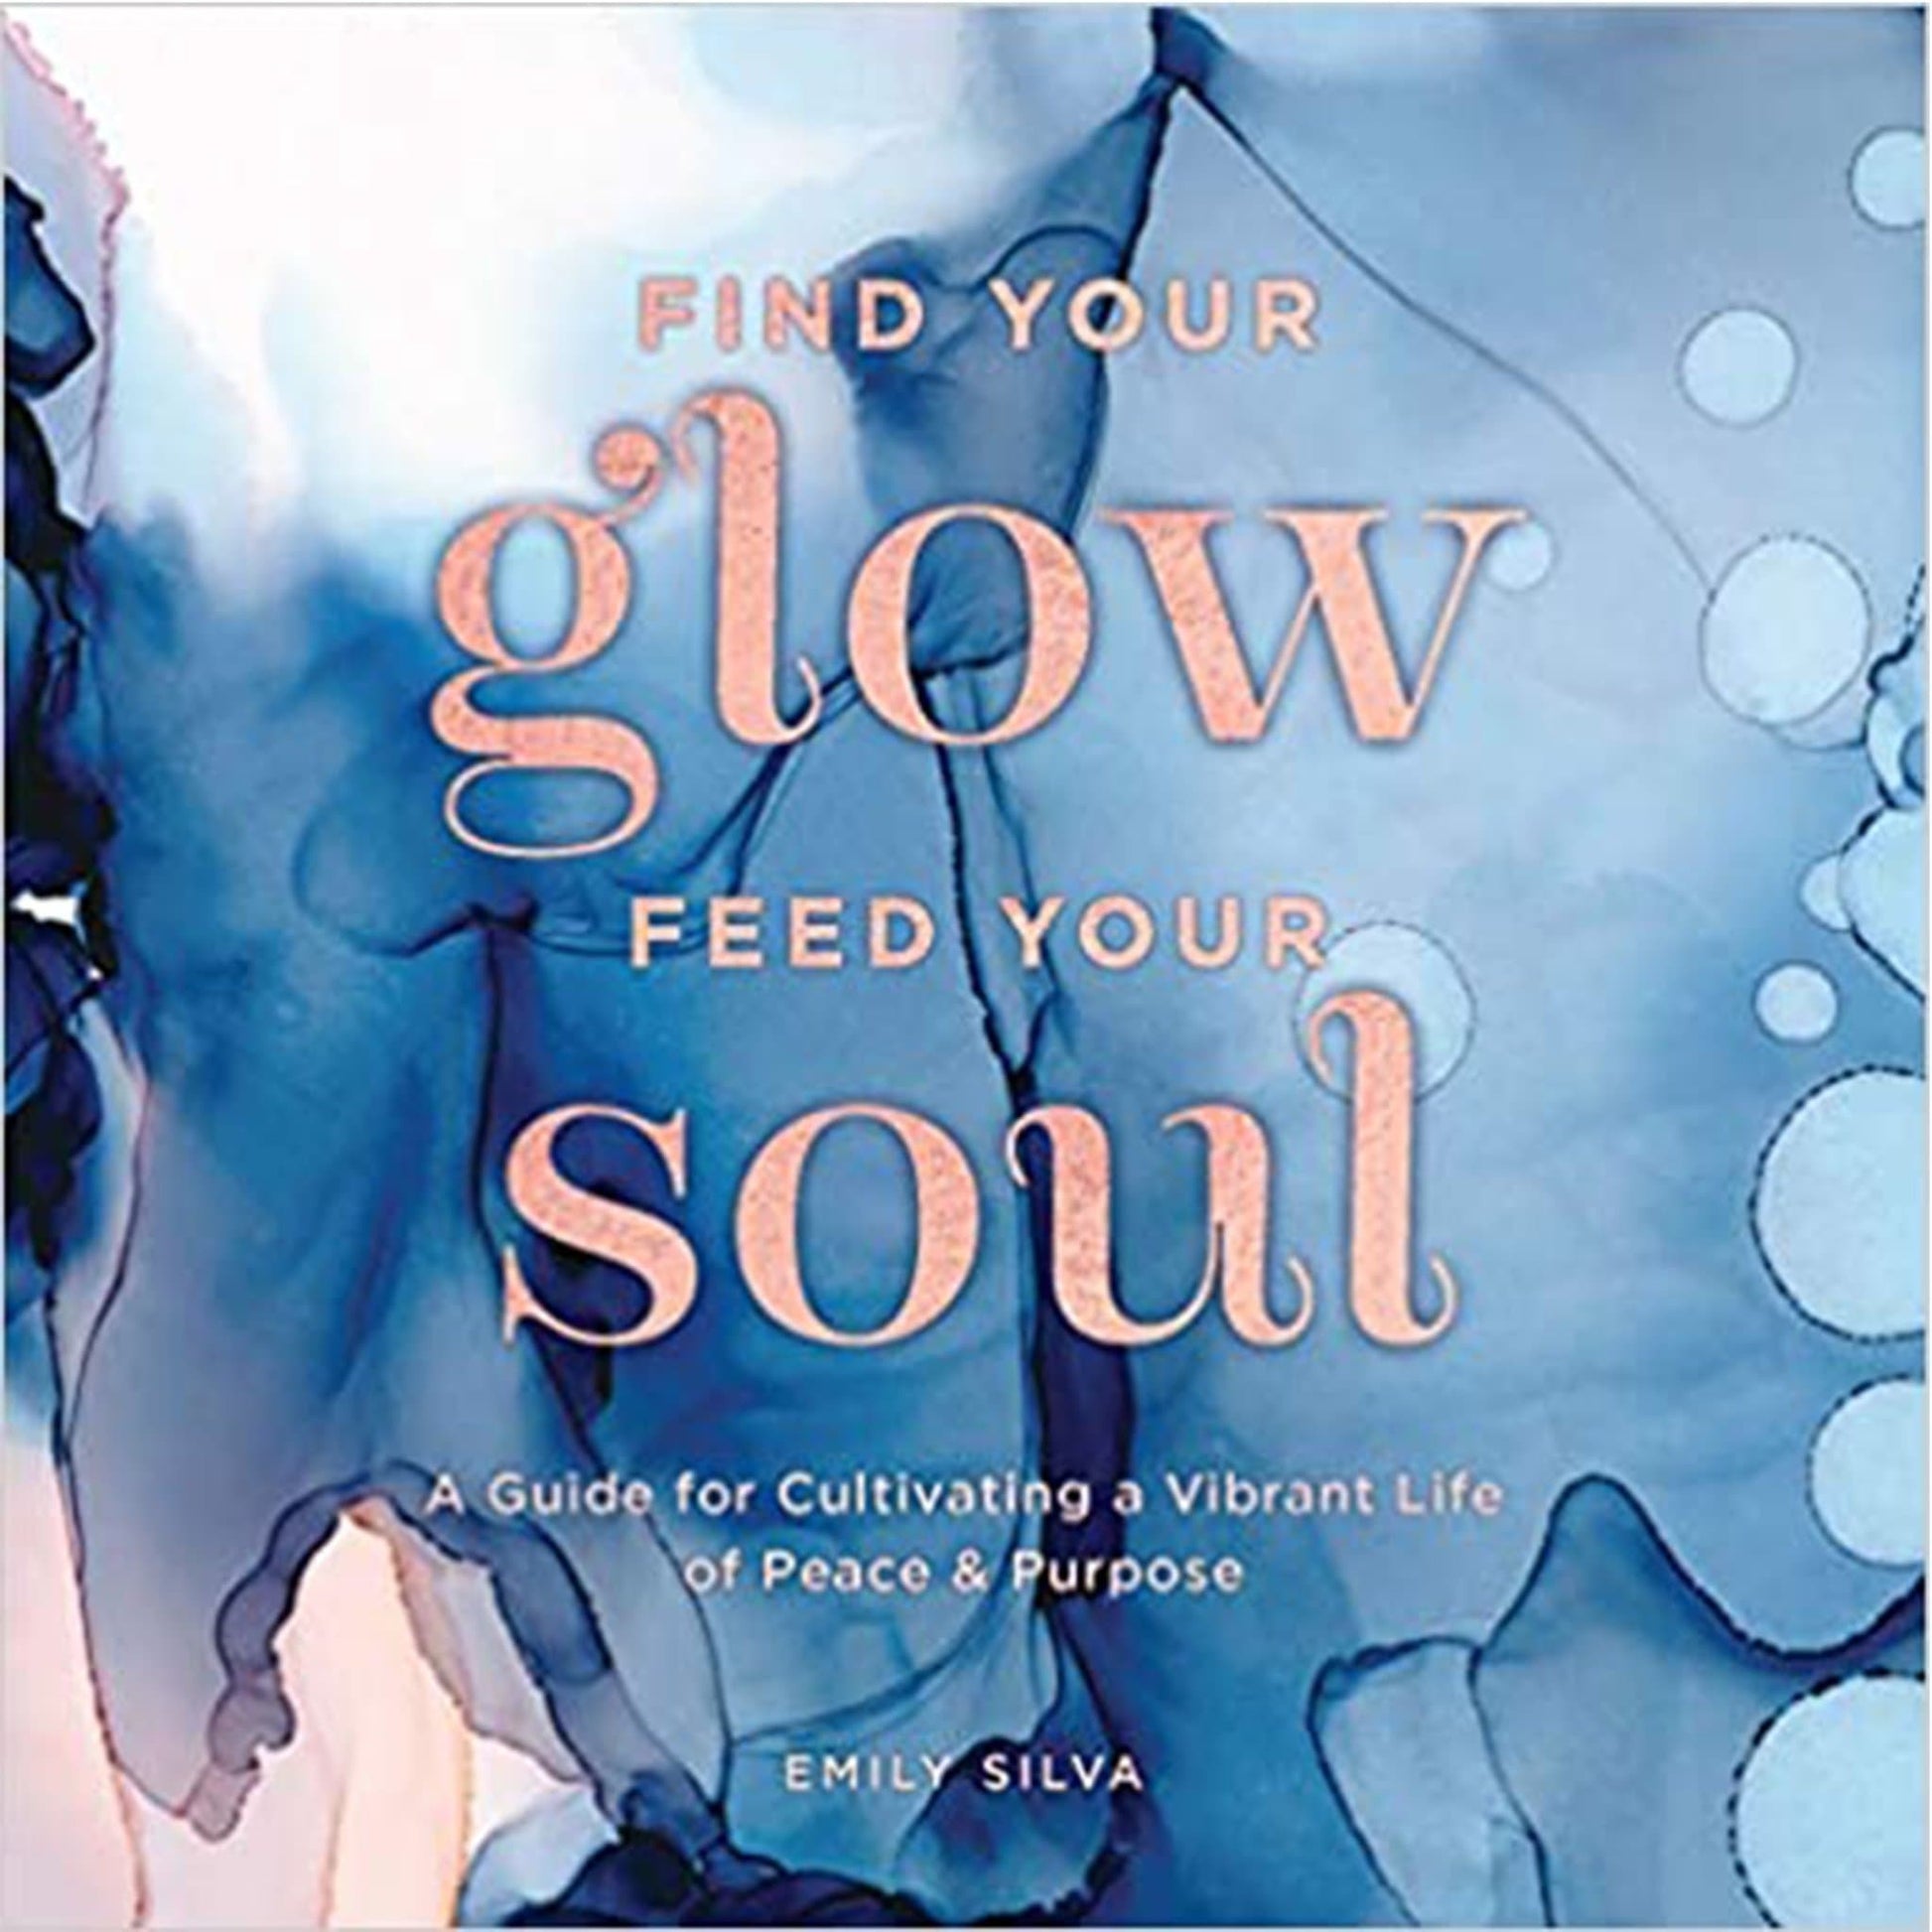 Find Your Glow, Feed Your Soul: A Guide For Cultivating A Vibrant Life Of Peace & Purpose - Muse + Moonstone